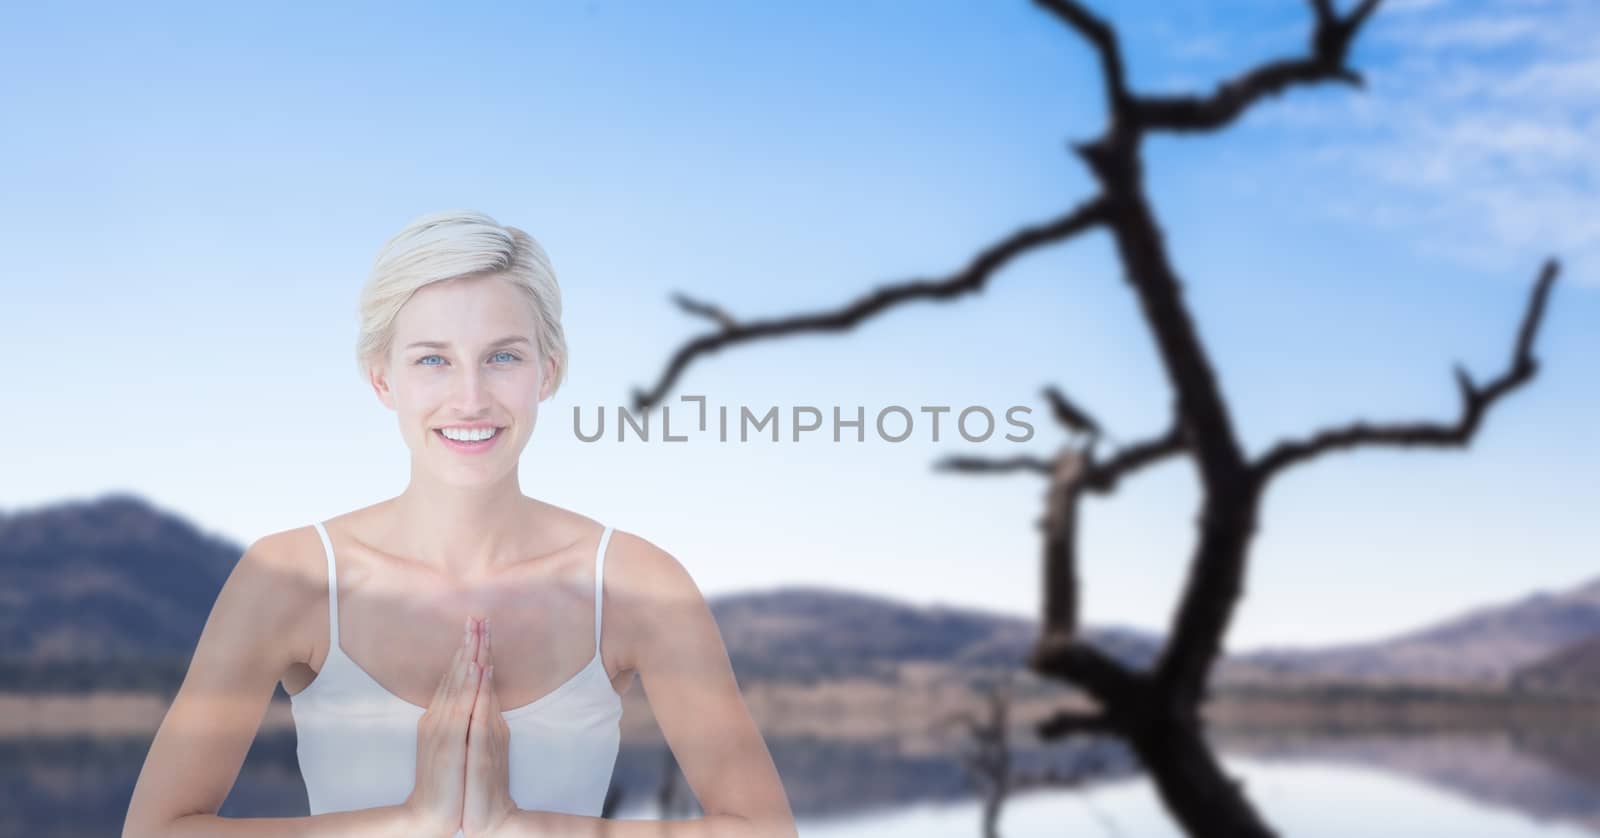 Digital composite of Double exposure of woman with hands clasped performing yoga